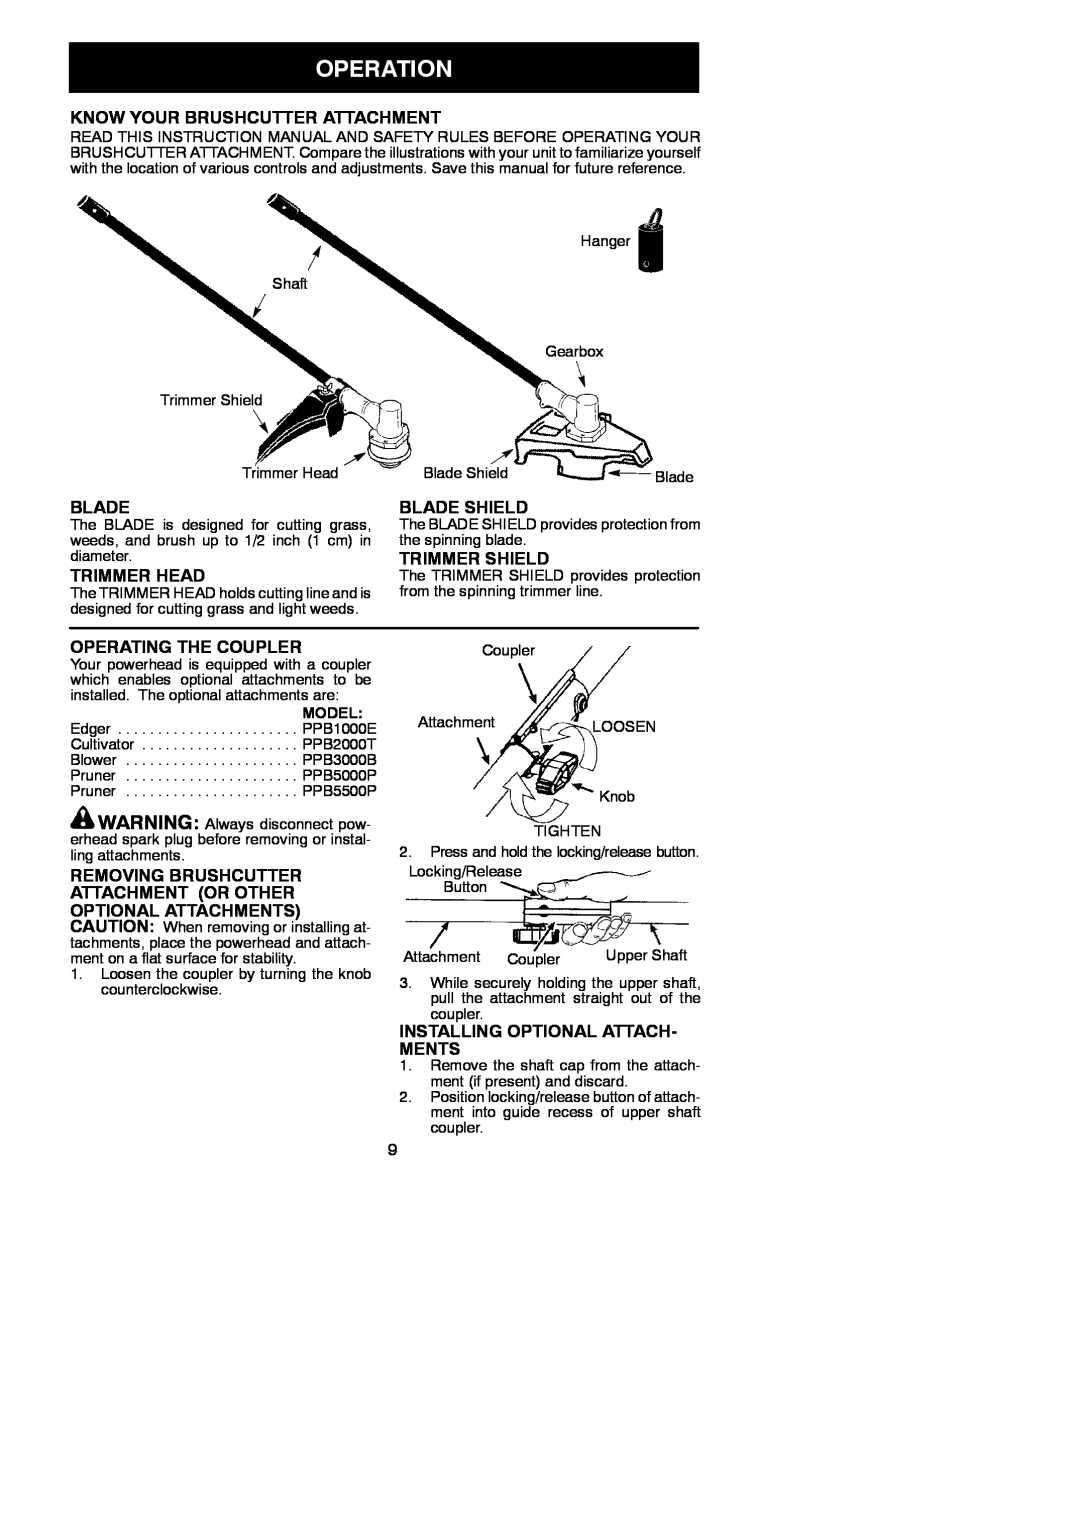 Poulan 545212832 Operation, Know Your Brushcutter Attachment, Blade Shield, Trimmer Shield, Trimmer Head, Ments 